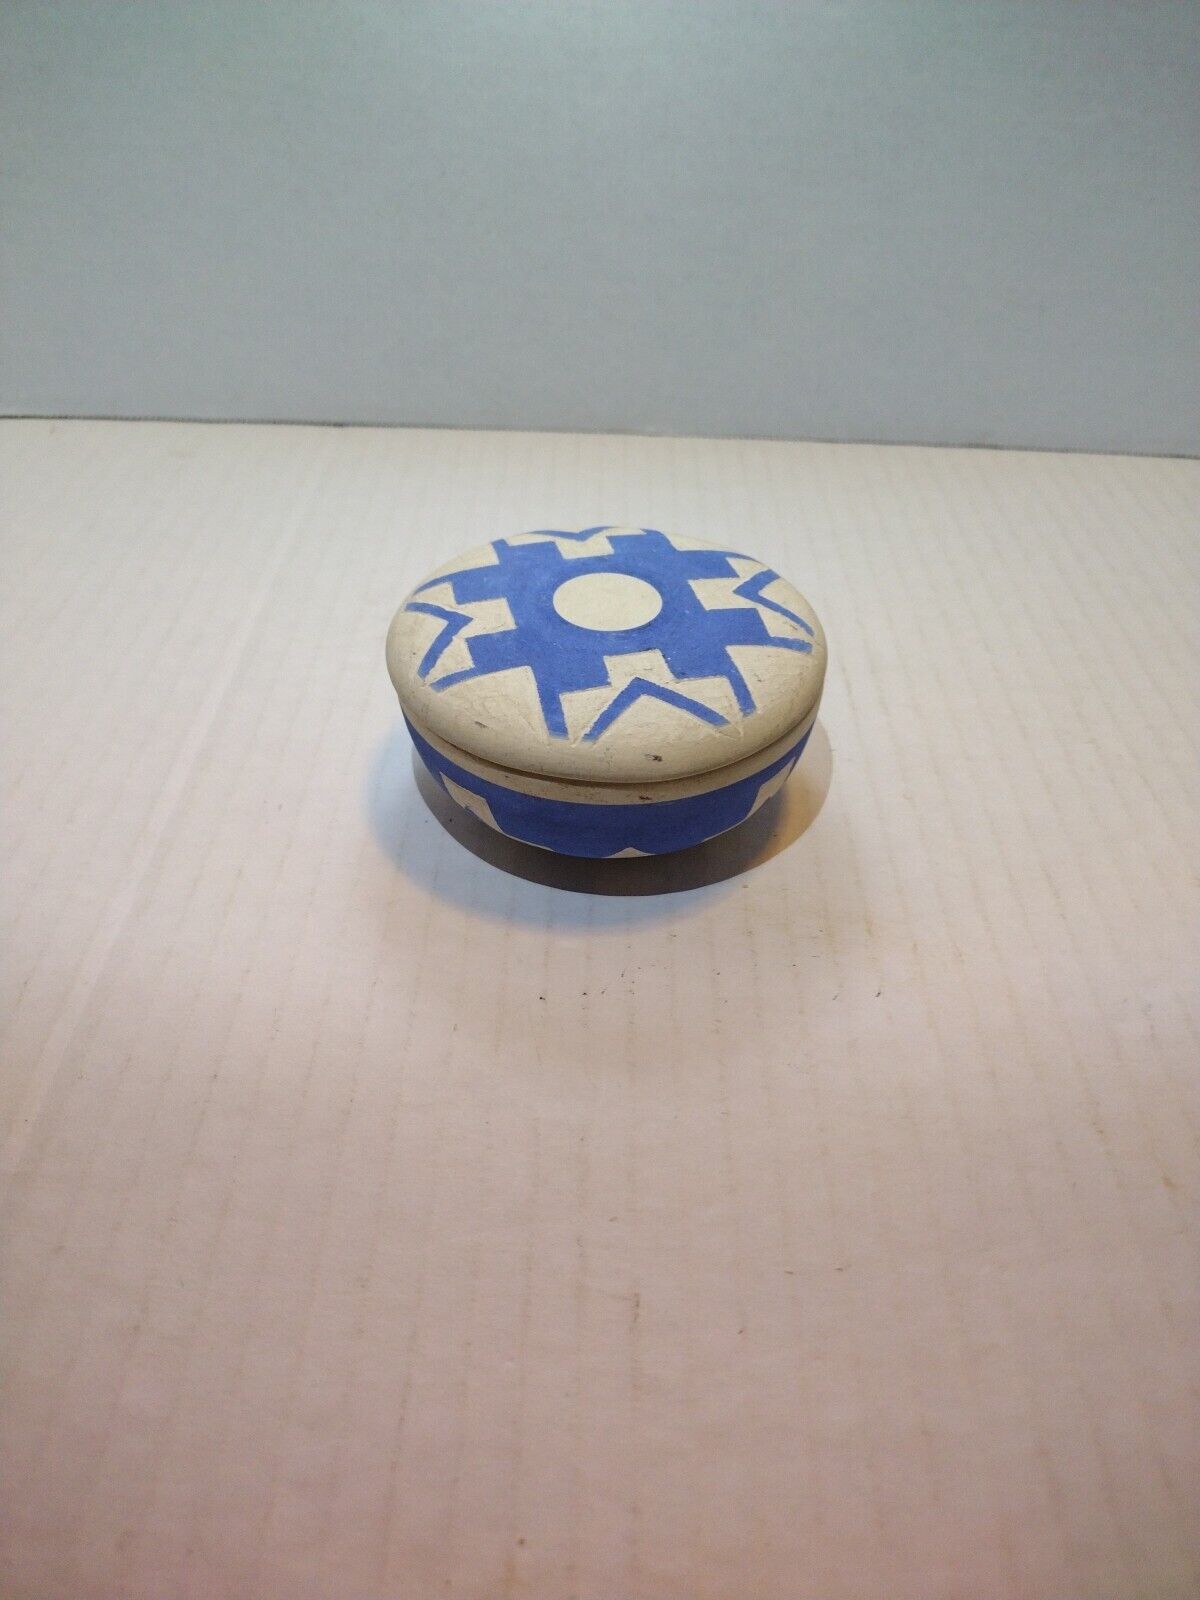 Artist Signed Pottery, Sioux Indian Pottery, Small Blue and White Trinket Dish